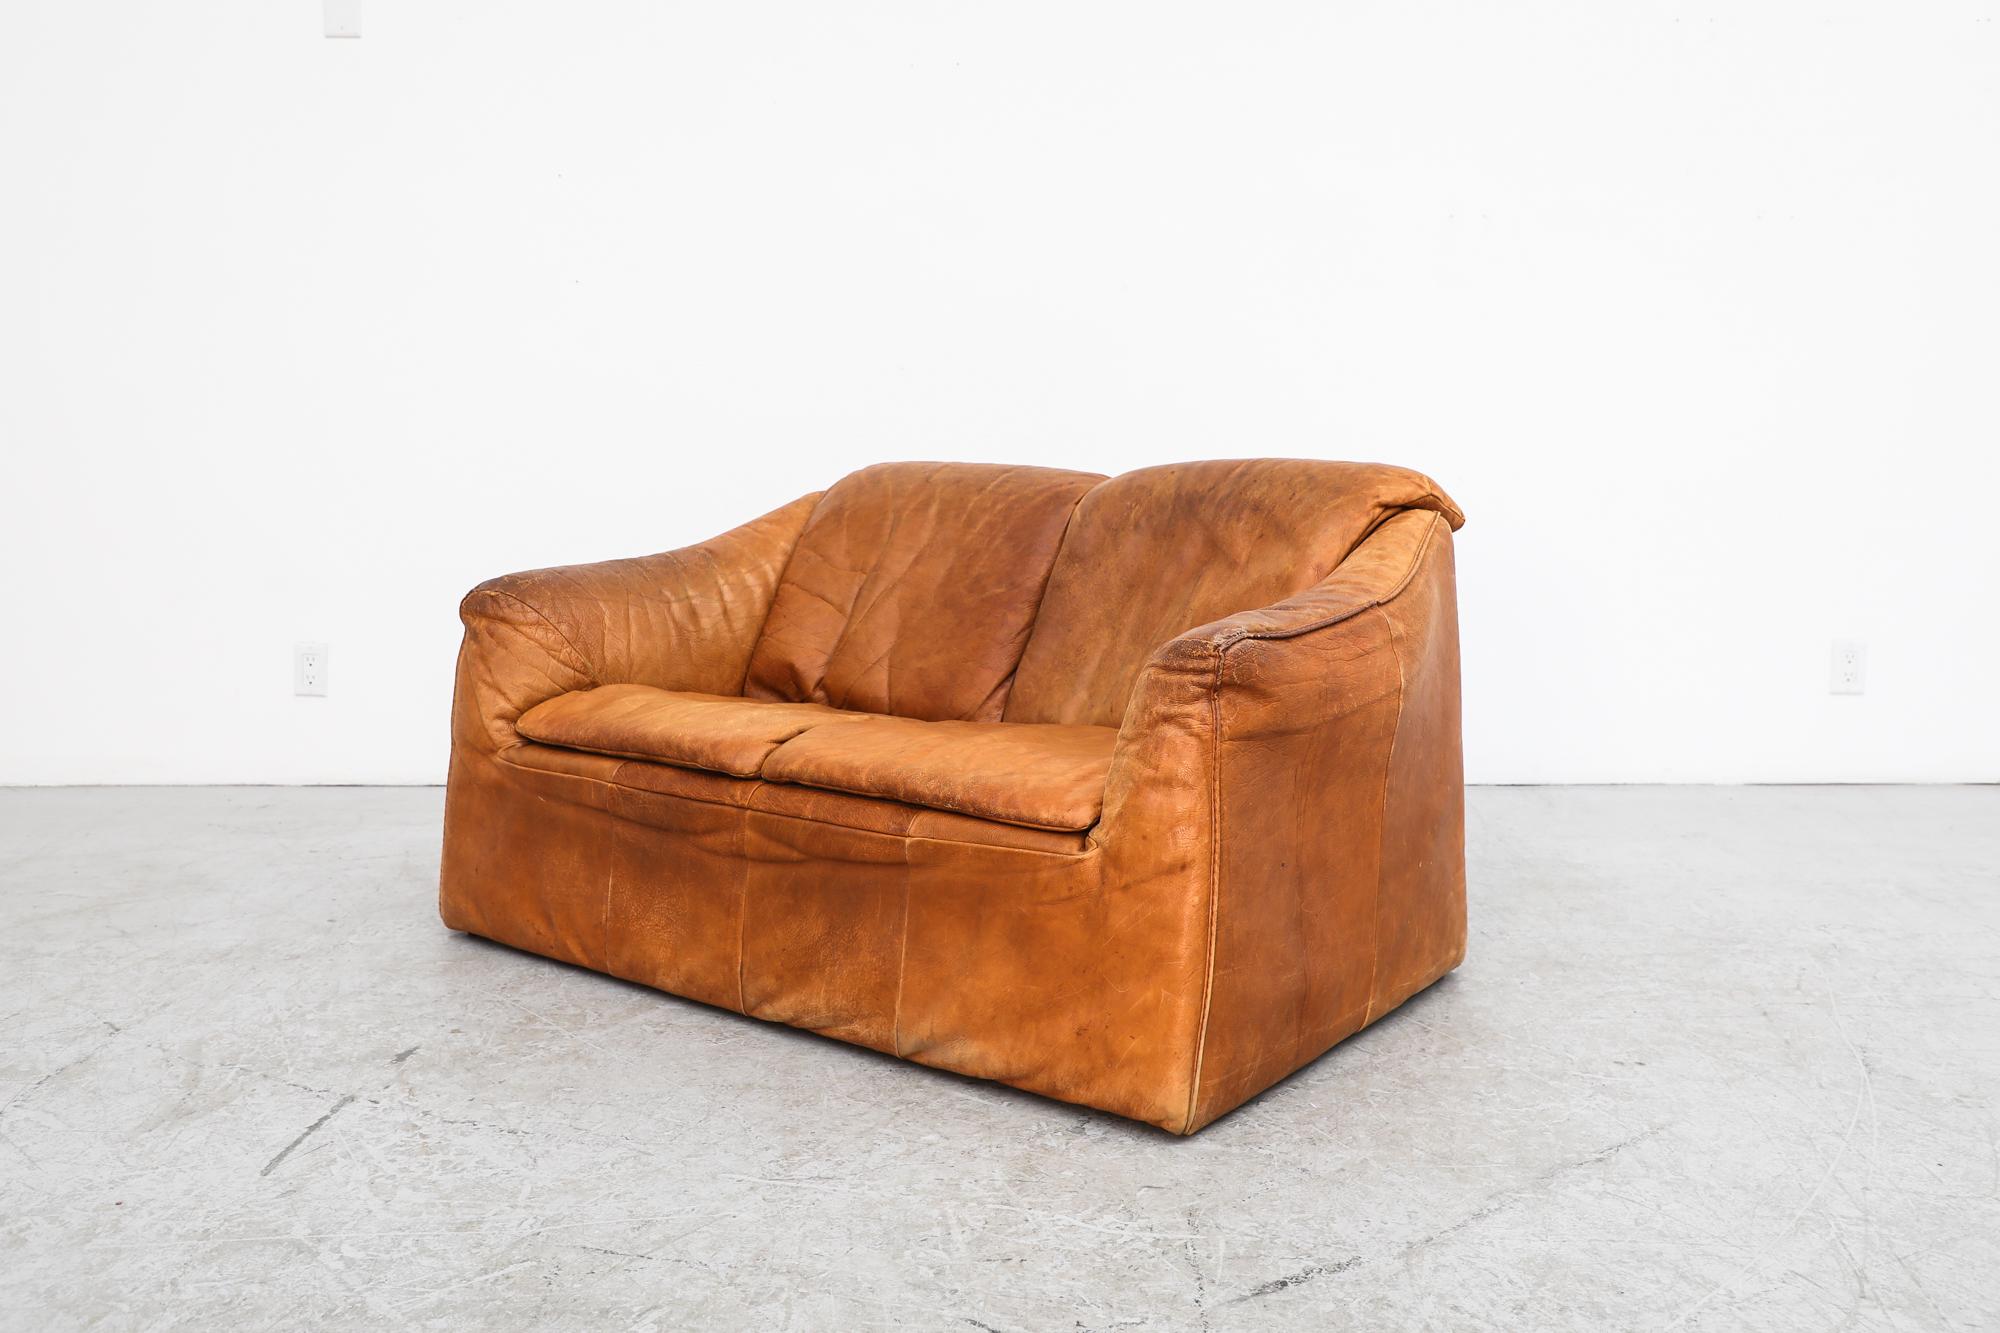 Cognac leather loveseat designed by Gerard van den Berg for Montis. In original condition with visible wear, including heavy patina on leather and some loose stitching. Wear is consistent with its age and use.